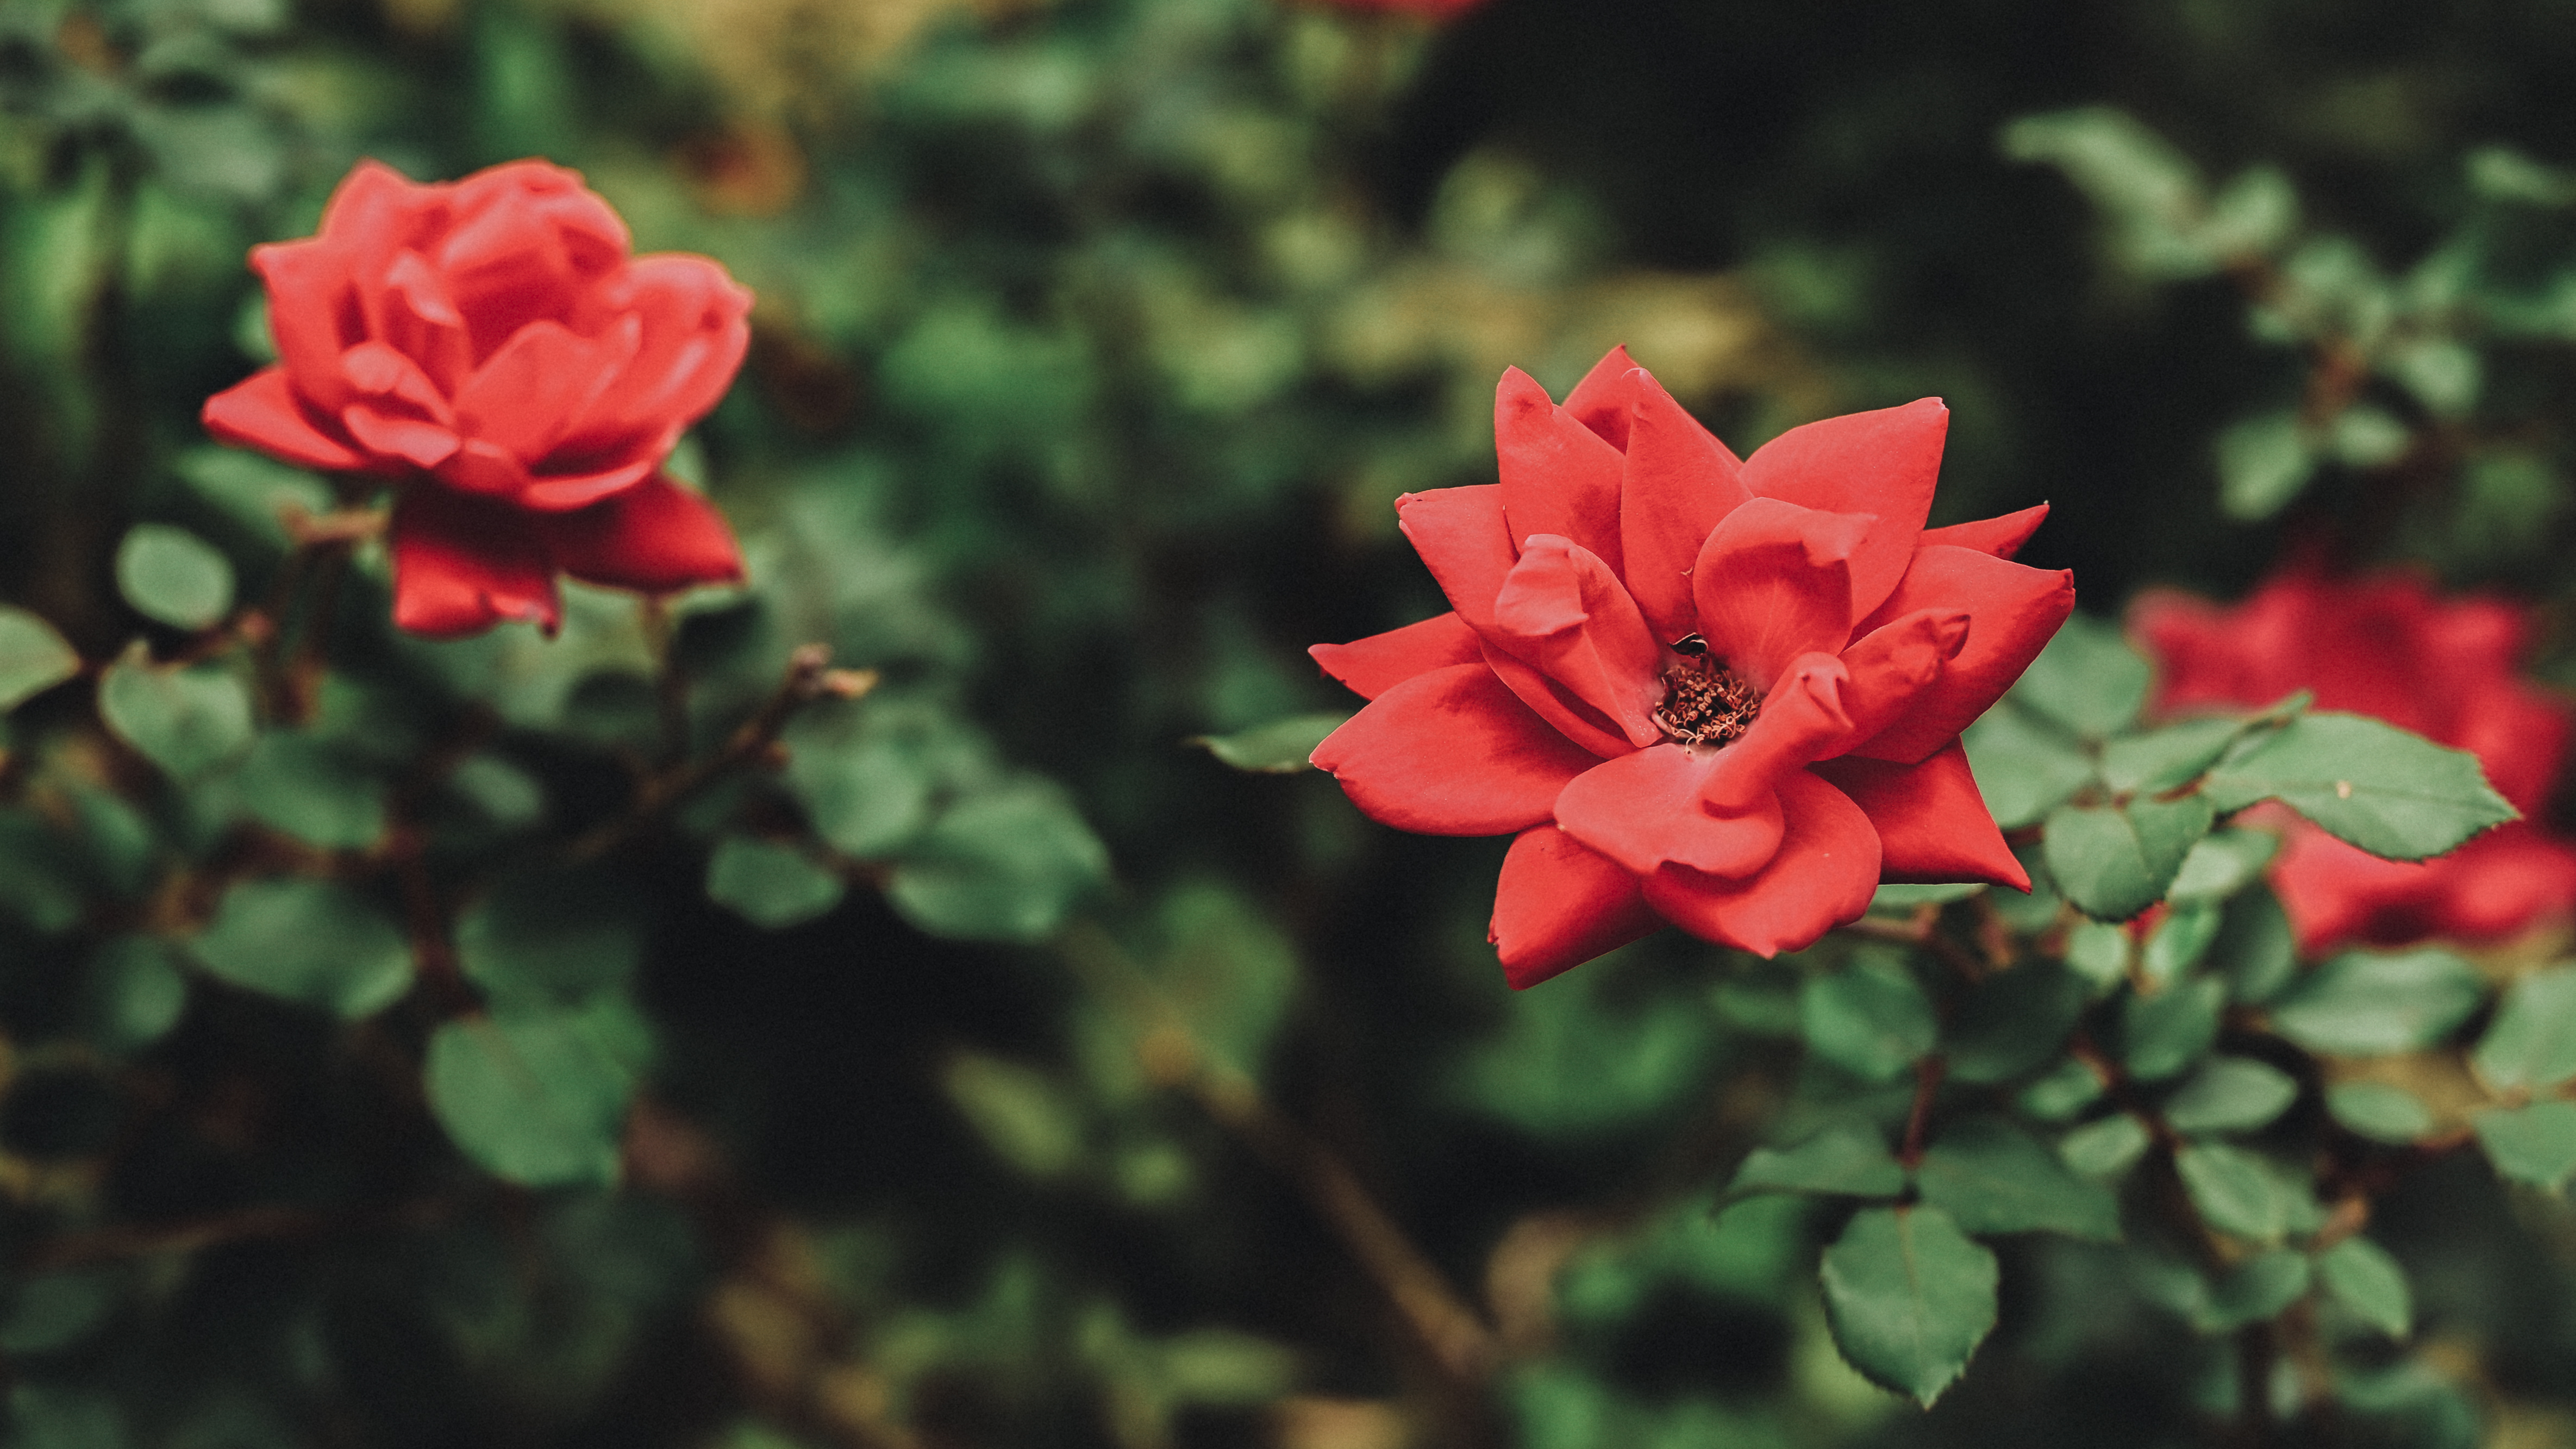 Rose Flowers Nature Red Flowers 50mm Outdoors Photography 4740x2666